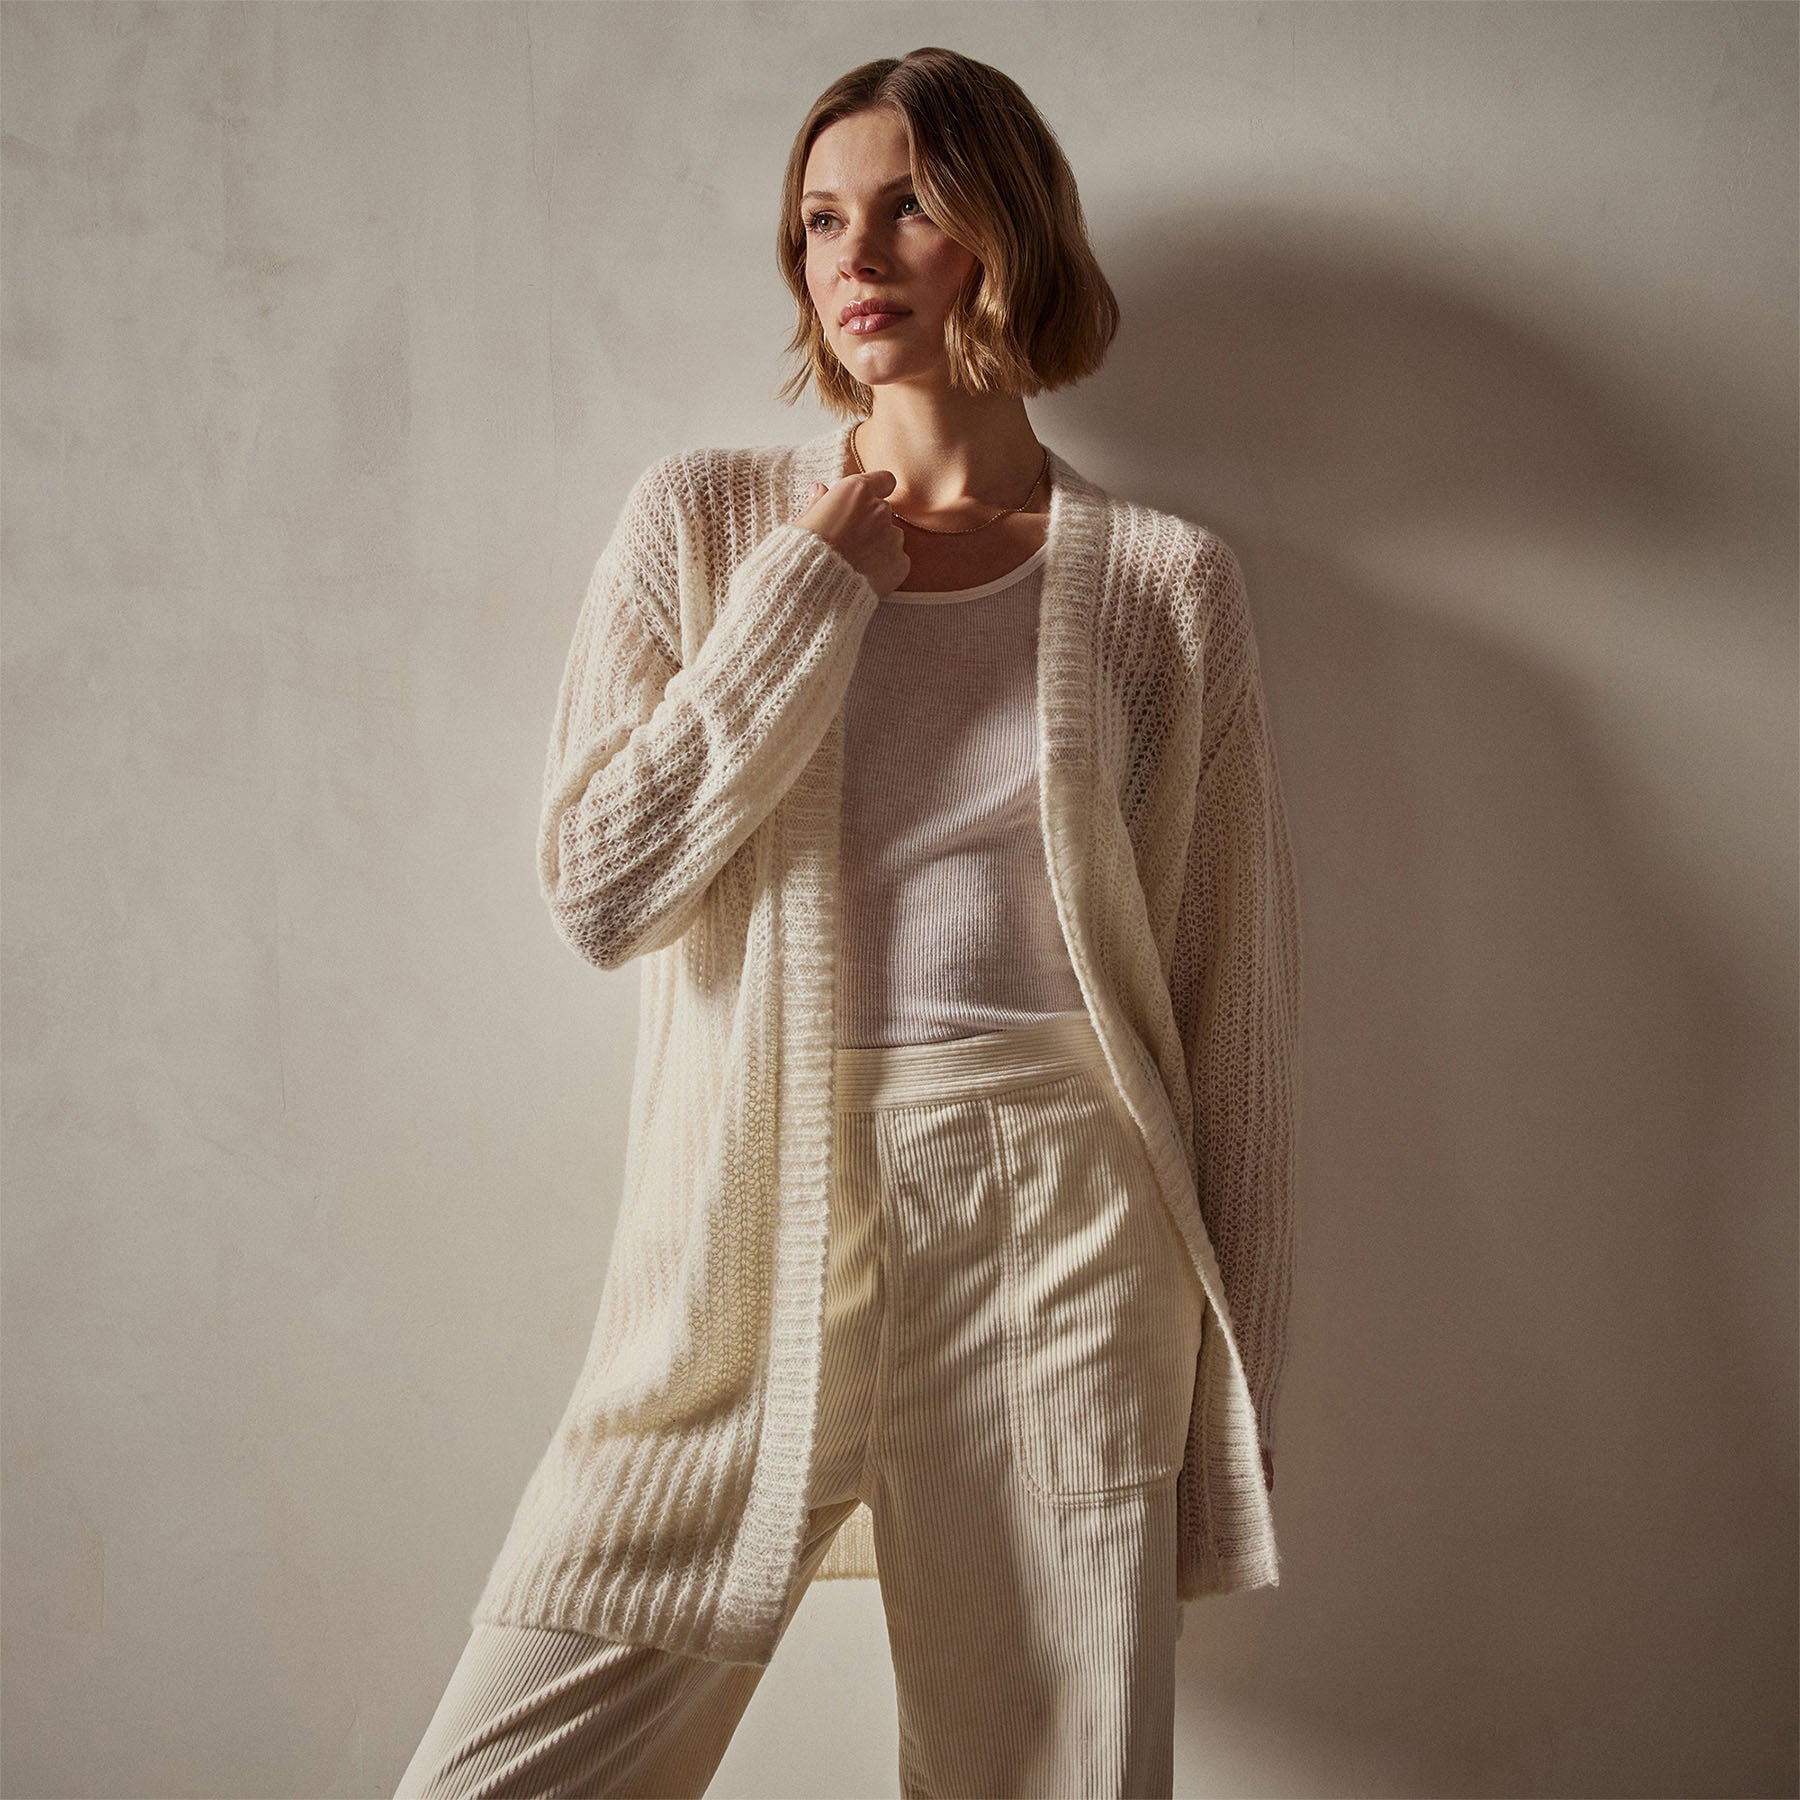 Textured Cashmere Knit Cardigan - Ivory